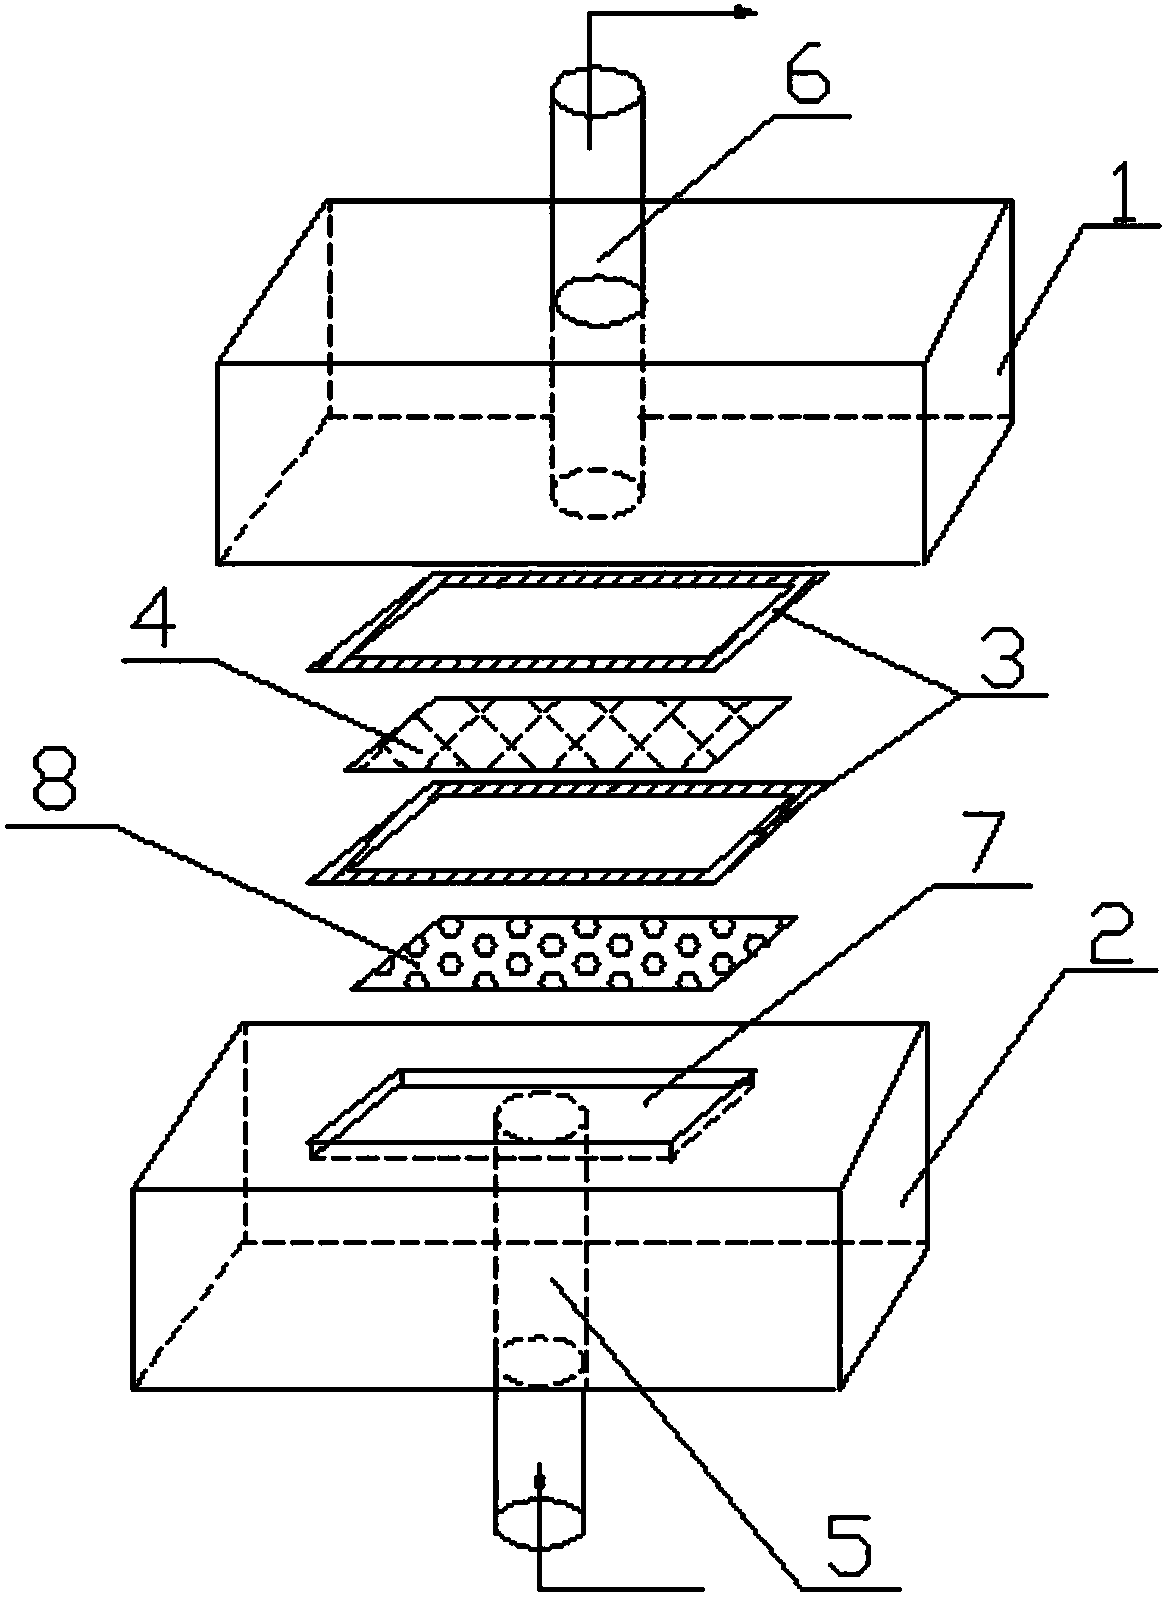 Fabric thickness directional permeability testing device and testing method